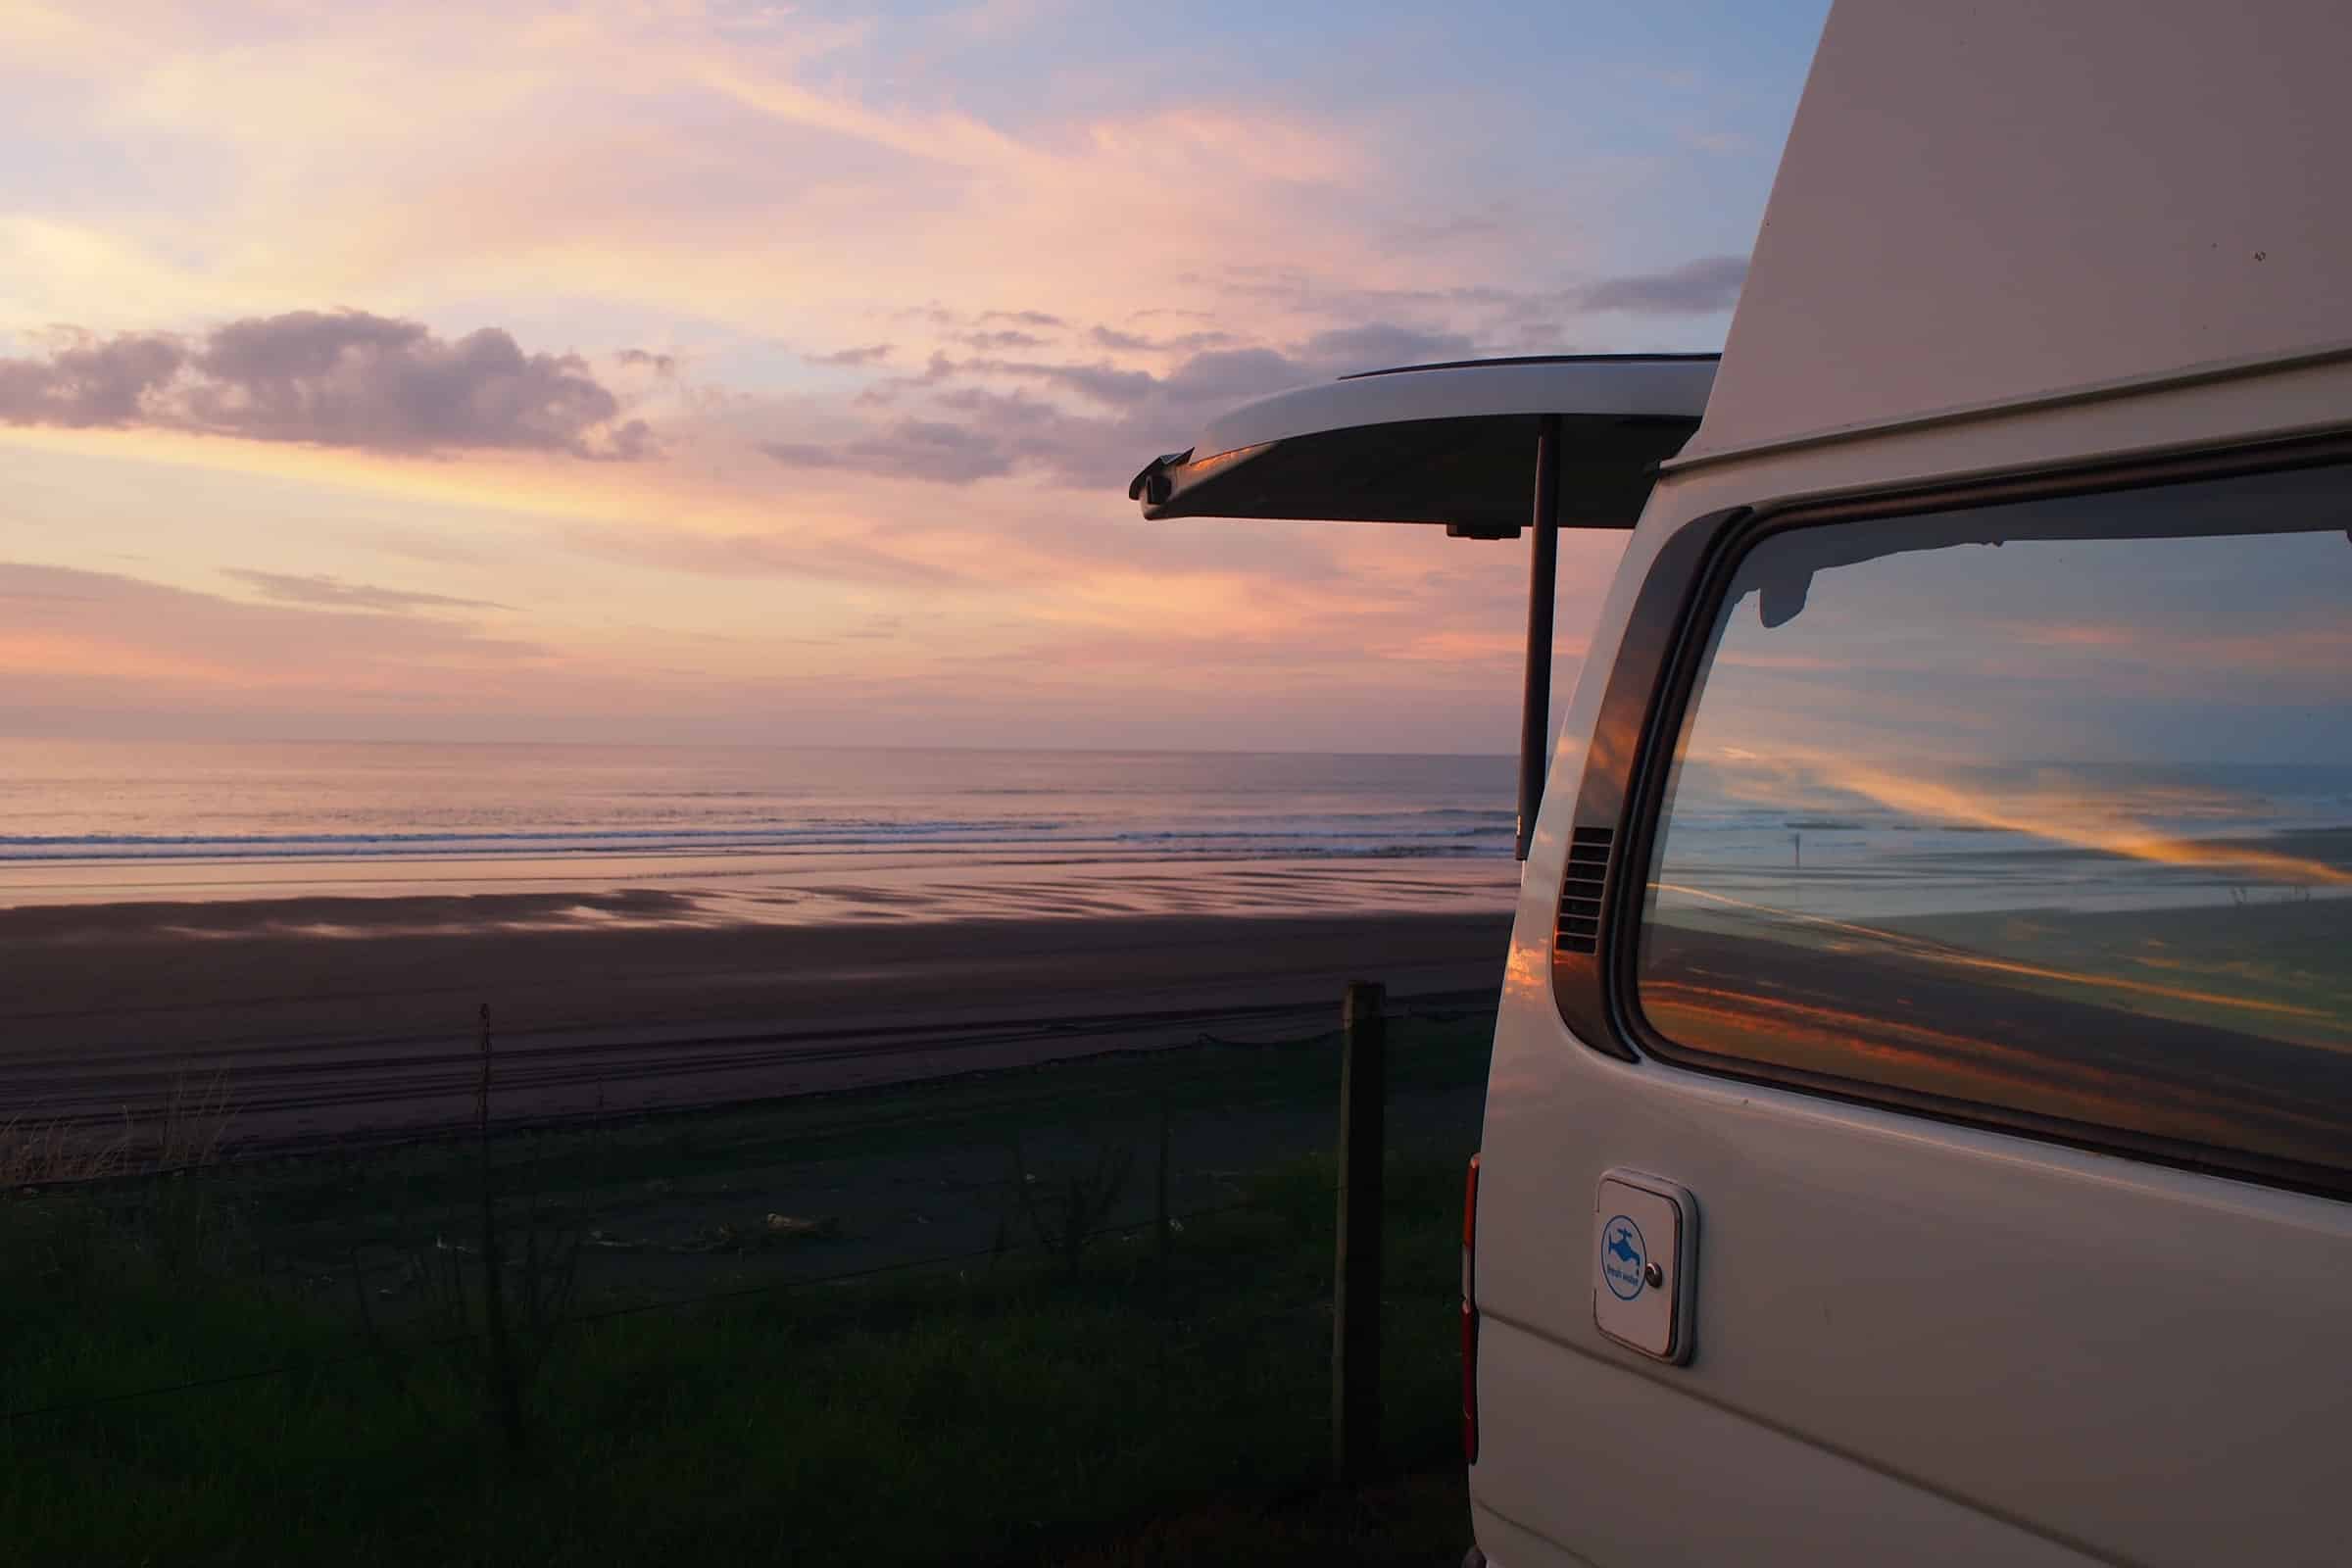 VANLIFE = waking up in the most beautiful places